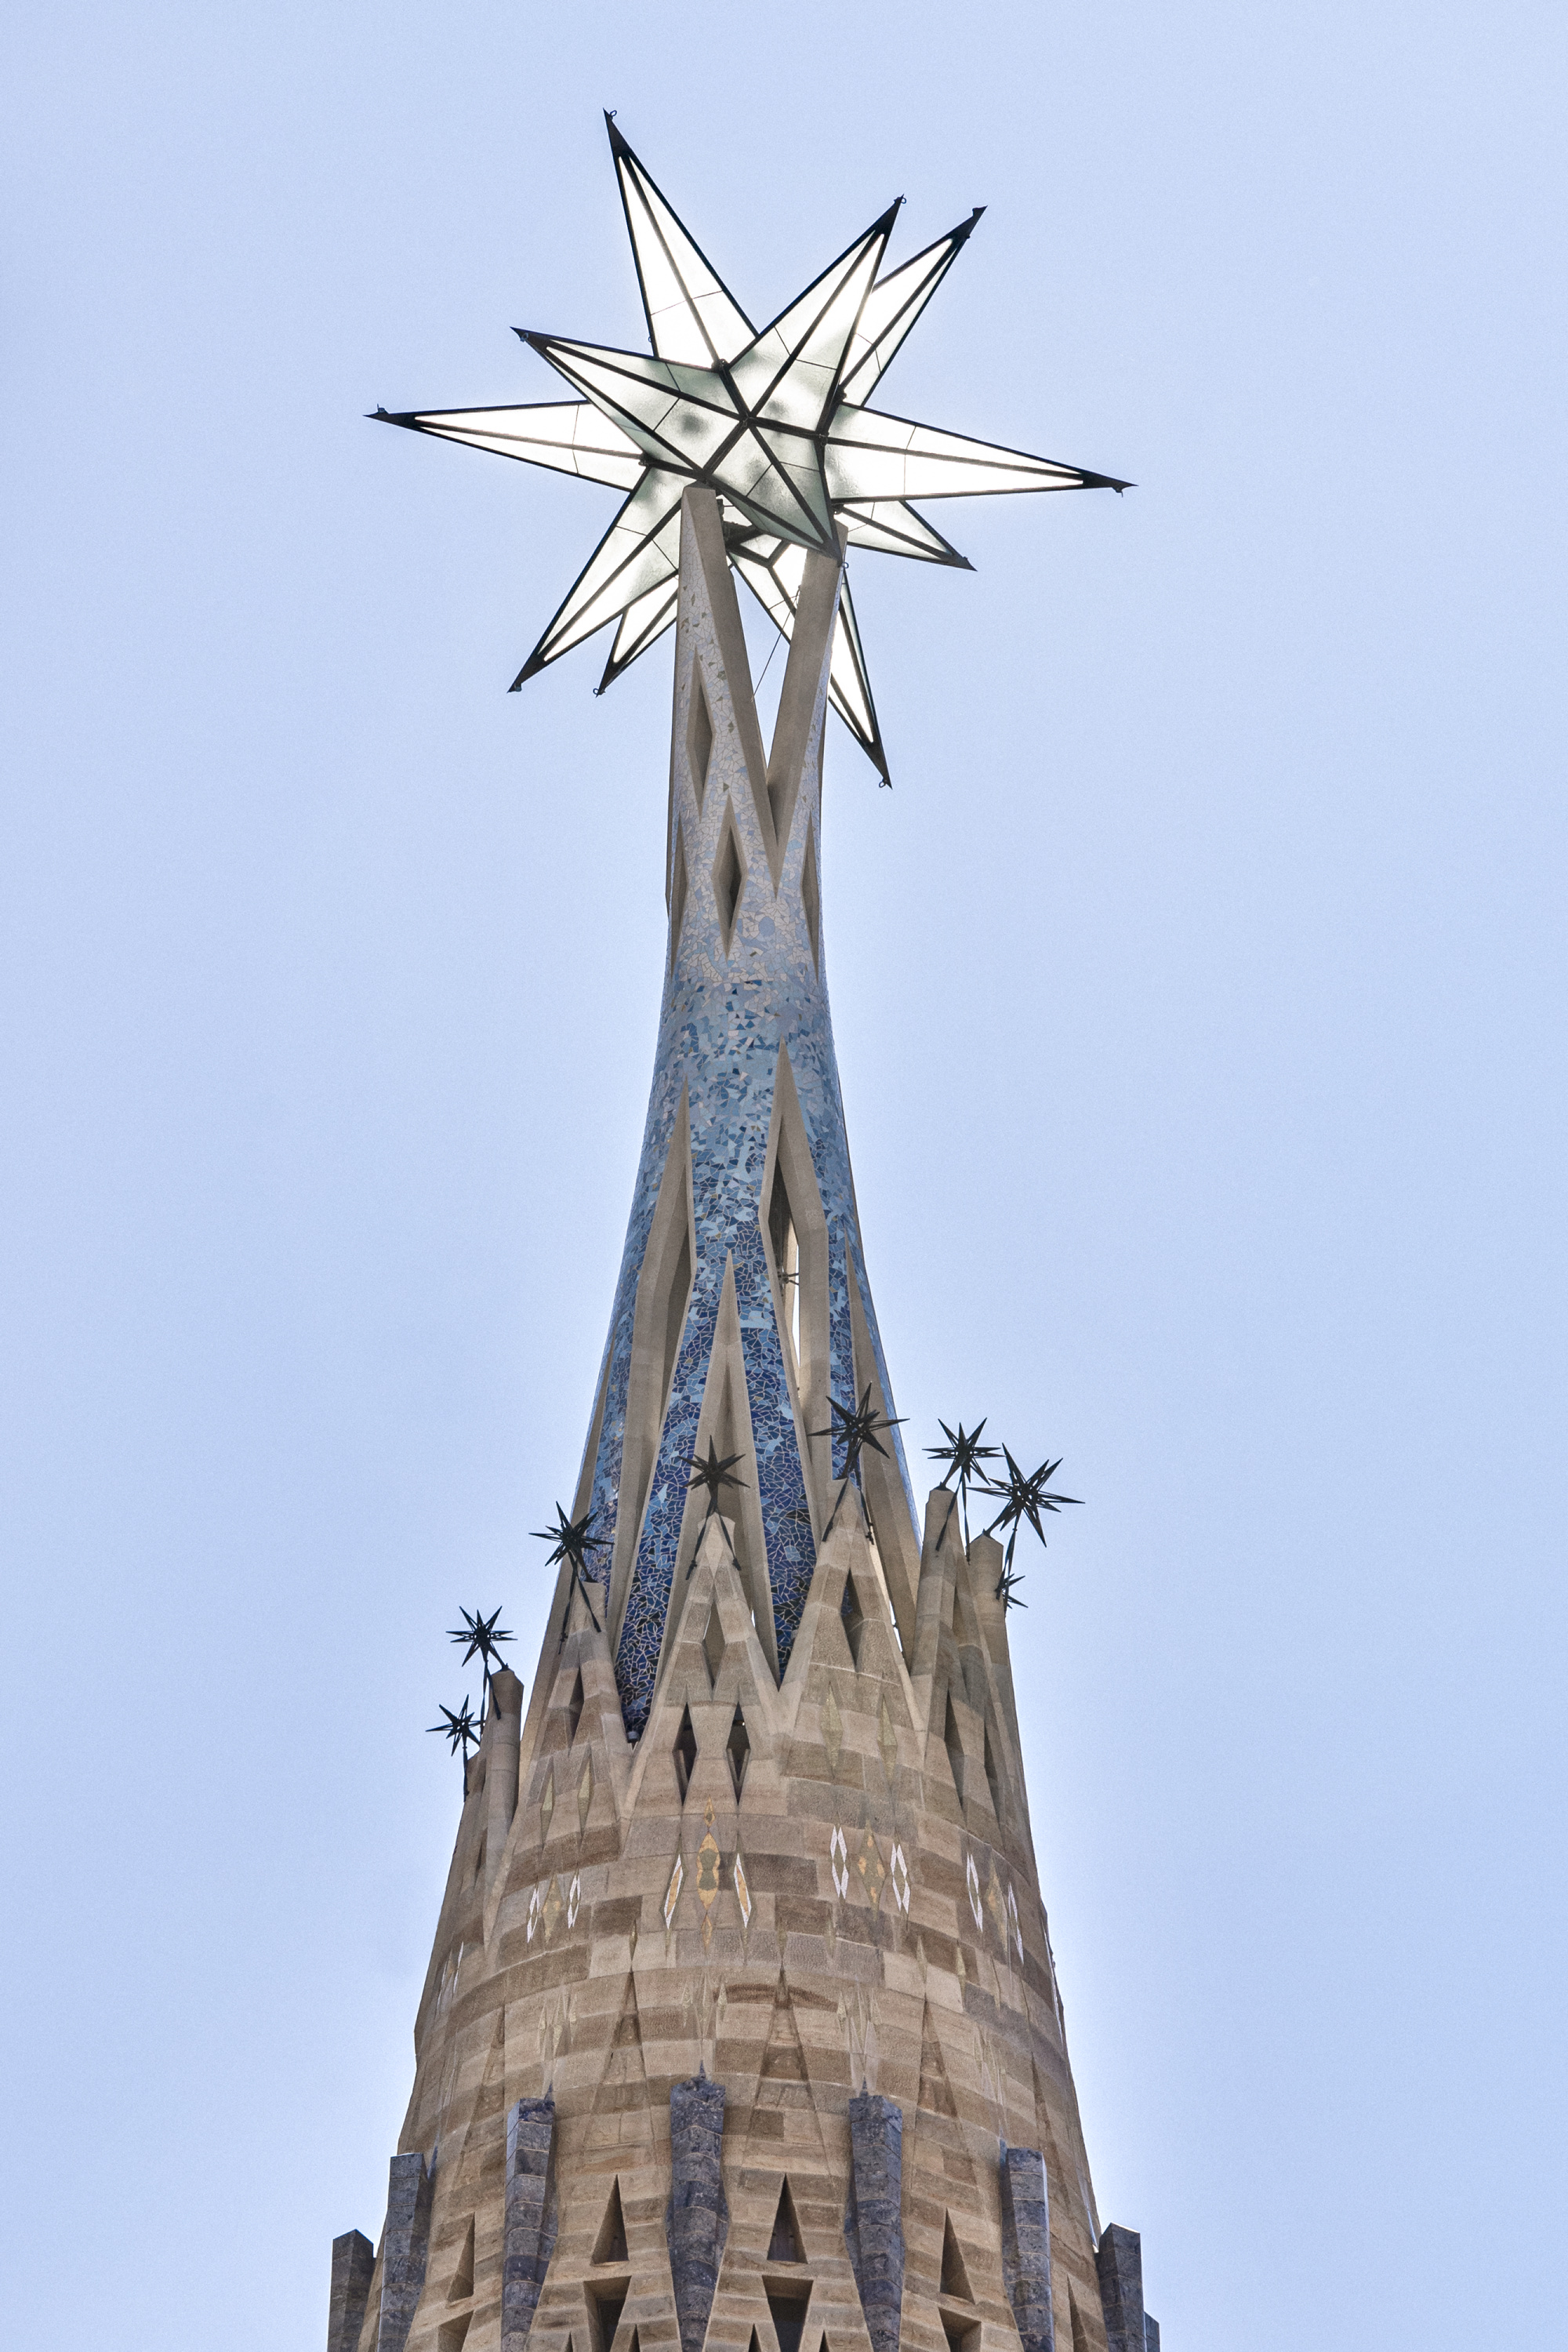 Star of tower of the Virgin Mary’s